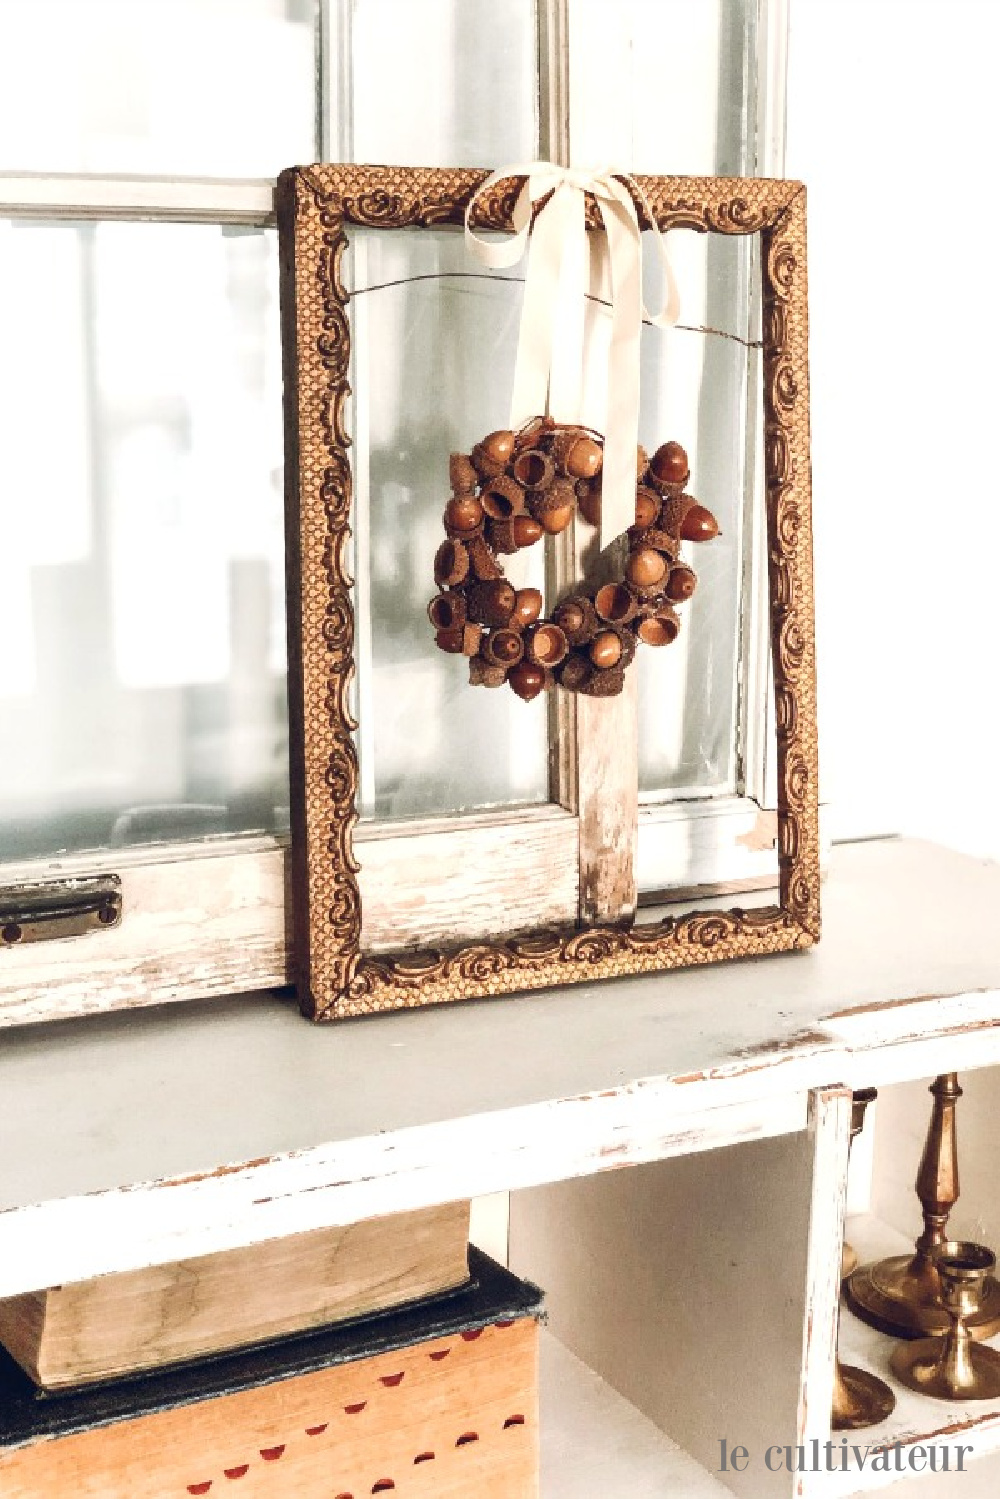 Sweet and rustic acorn wreath hangs on ribbon from vintage frame in a lovely French country white fall vignette - Le Cultivateur. #falldecor #fallwreaths #acornwreath